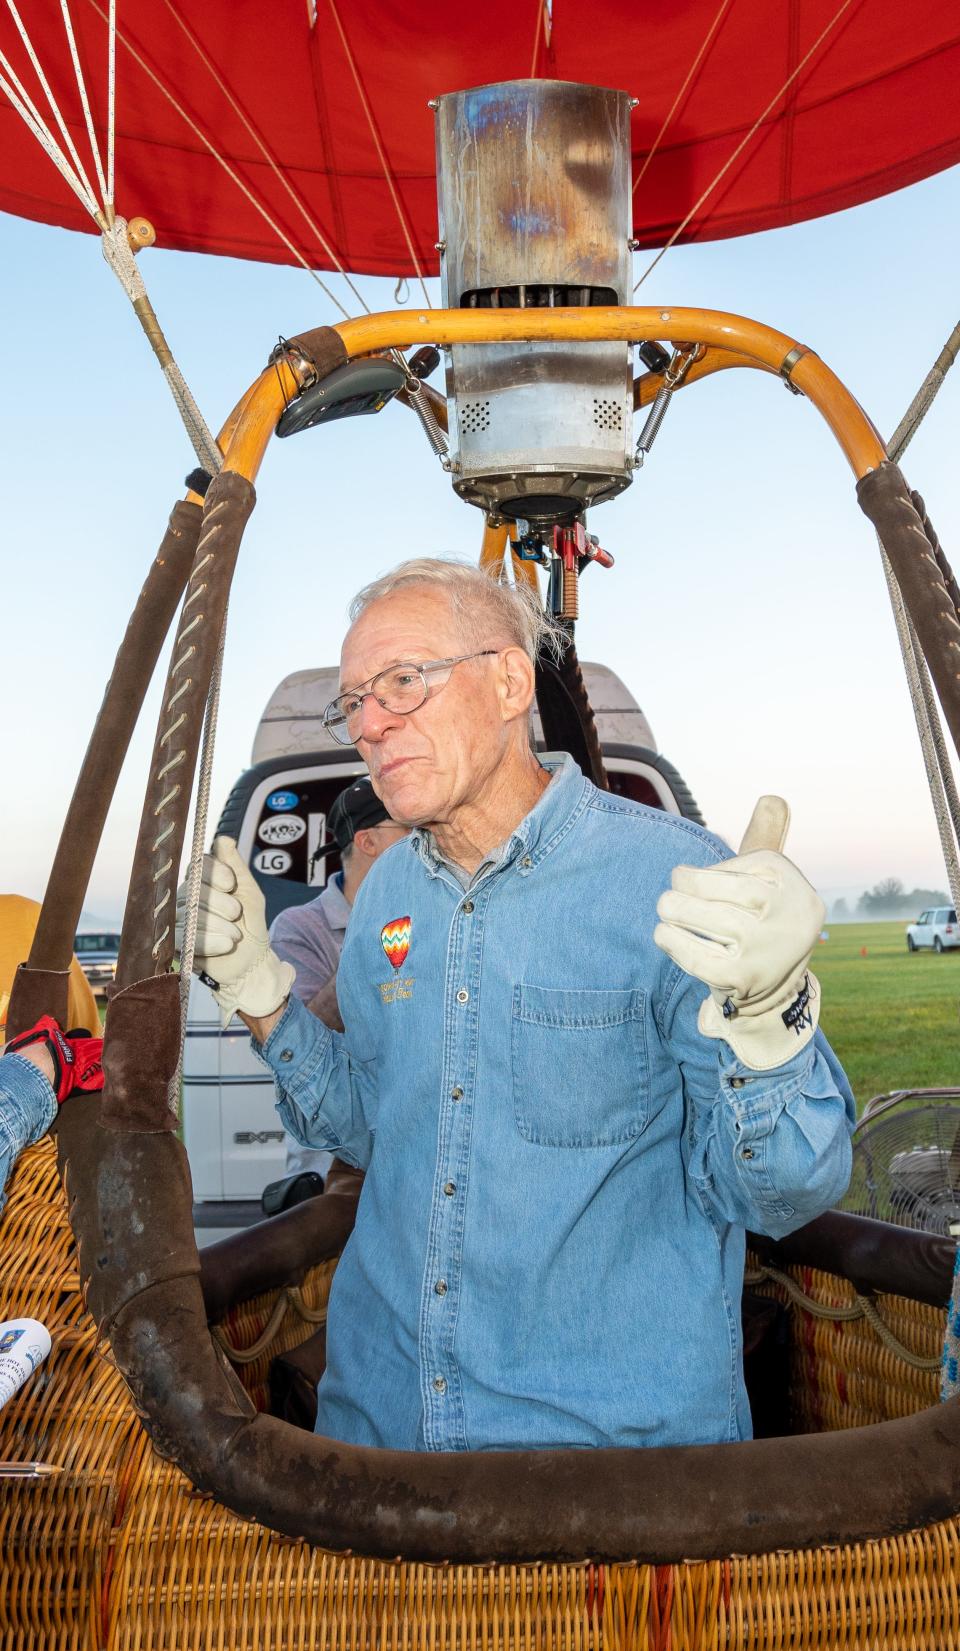 Dick Young, of Parsippany, pilot for the Going My Way balloon, at the 40th annual festival of ballooning at Solberg Airport in Readington.